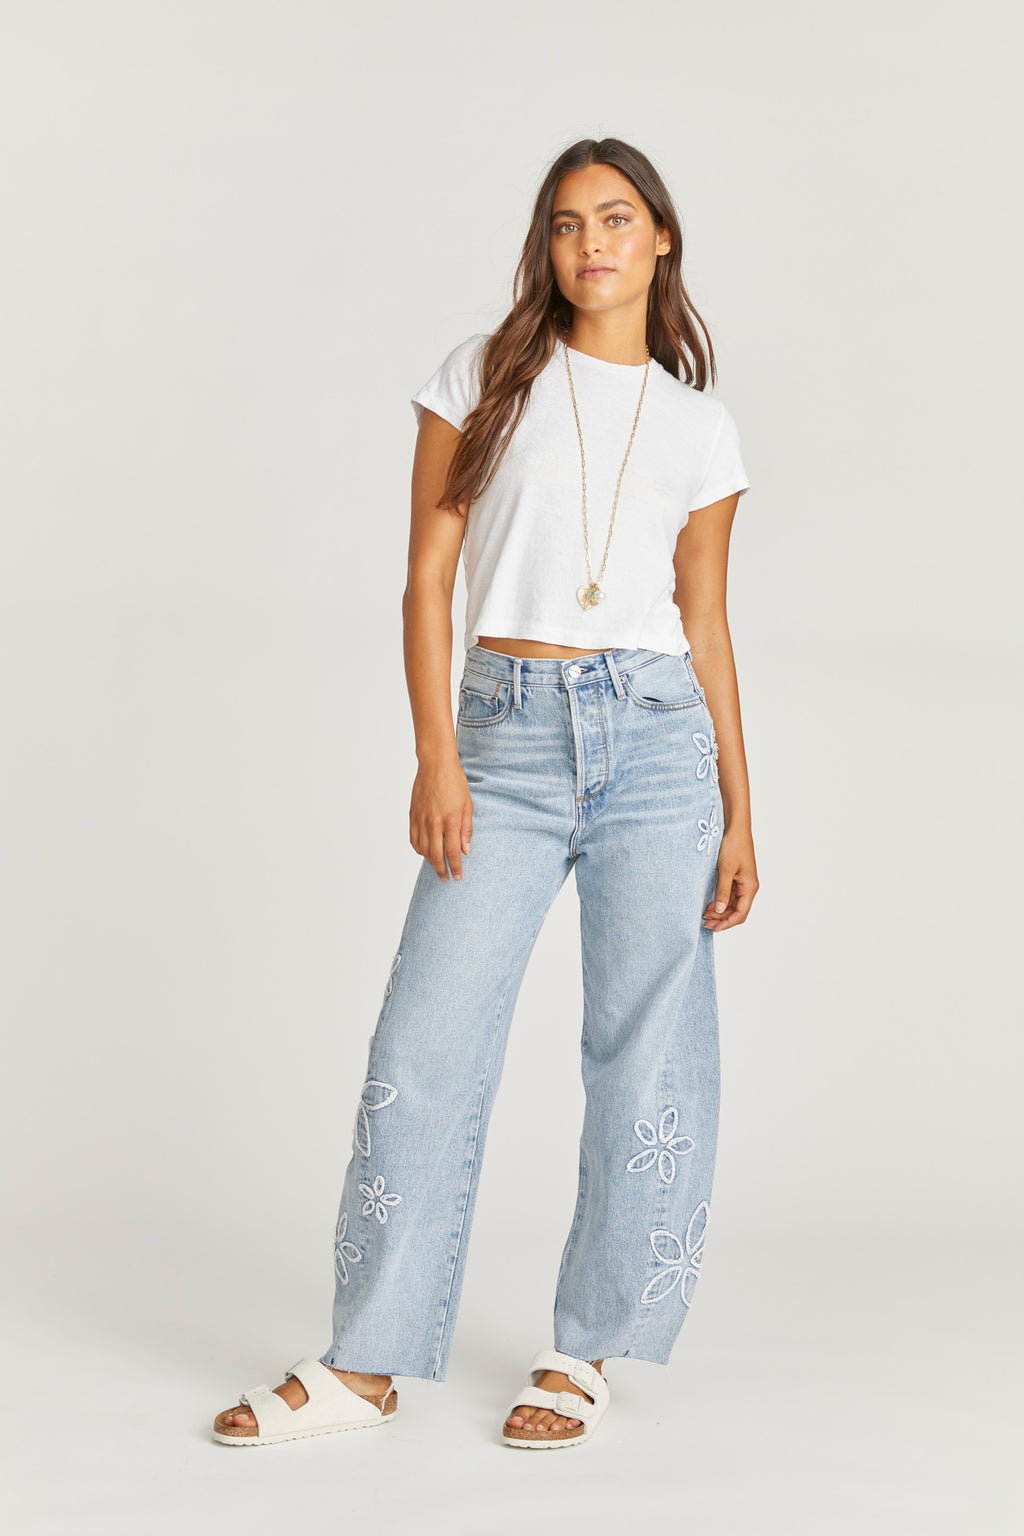 Women's Parker Wide Leg Jean from Crew Clothing Company